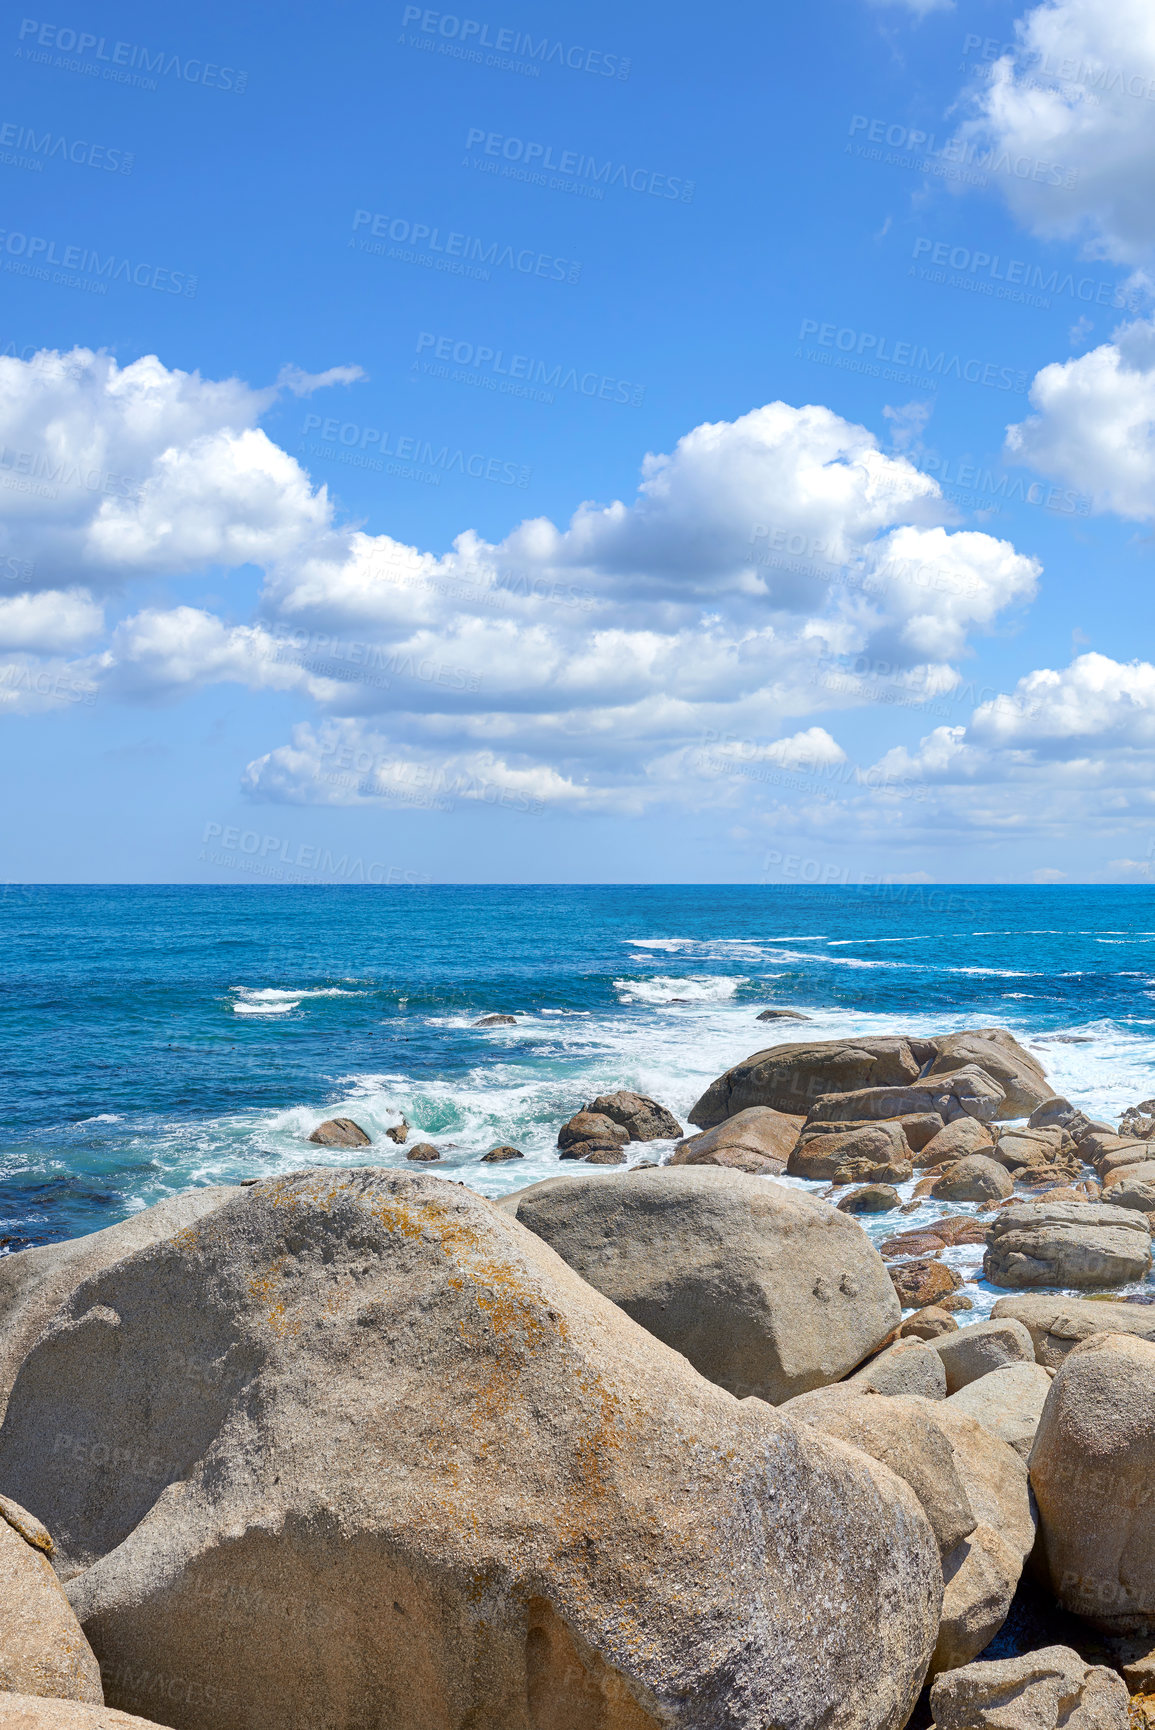 Buy stock photo Copyspace at sea with a cloudy blue sky background and rocky coast in Camps Bay, Cape Town, South Africa. Boulders at a beach shore across a majestic ocean. Scenic landscape for a summer holiday